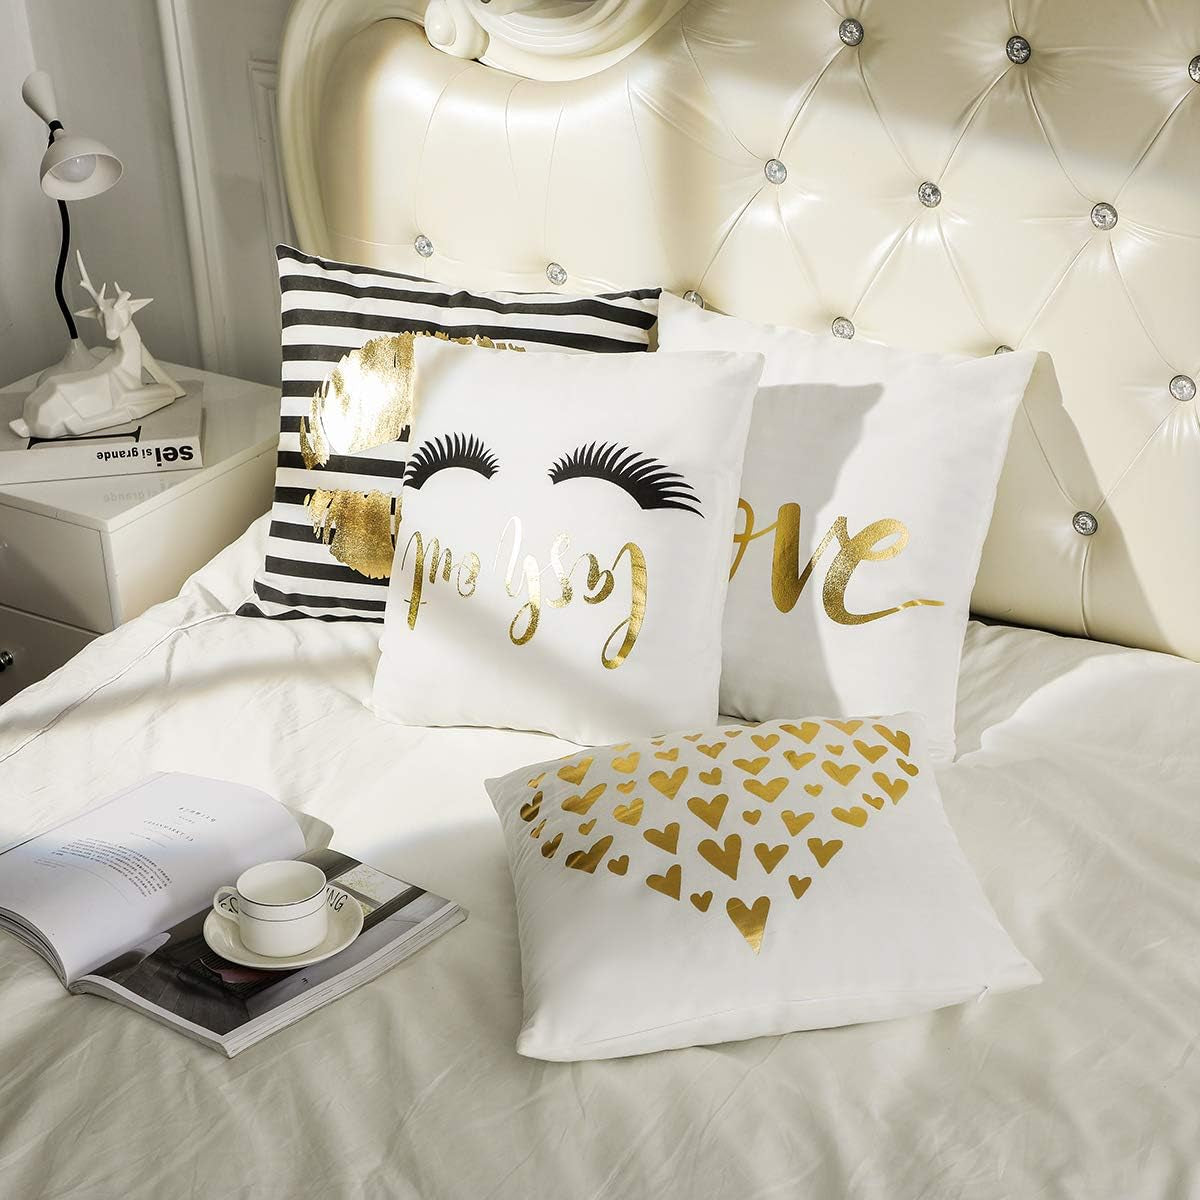 4Pcs Décor Throw Pillow Cover Super Soft Gold Foil Decorative Cushion Cover 18 X 18 Inches Eyelashes Lips Love Printed Pillow Case for Sofa Chair Car Bed (White)